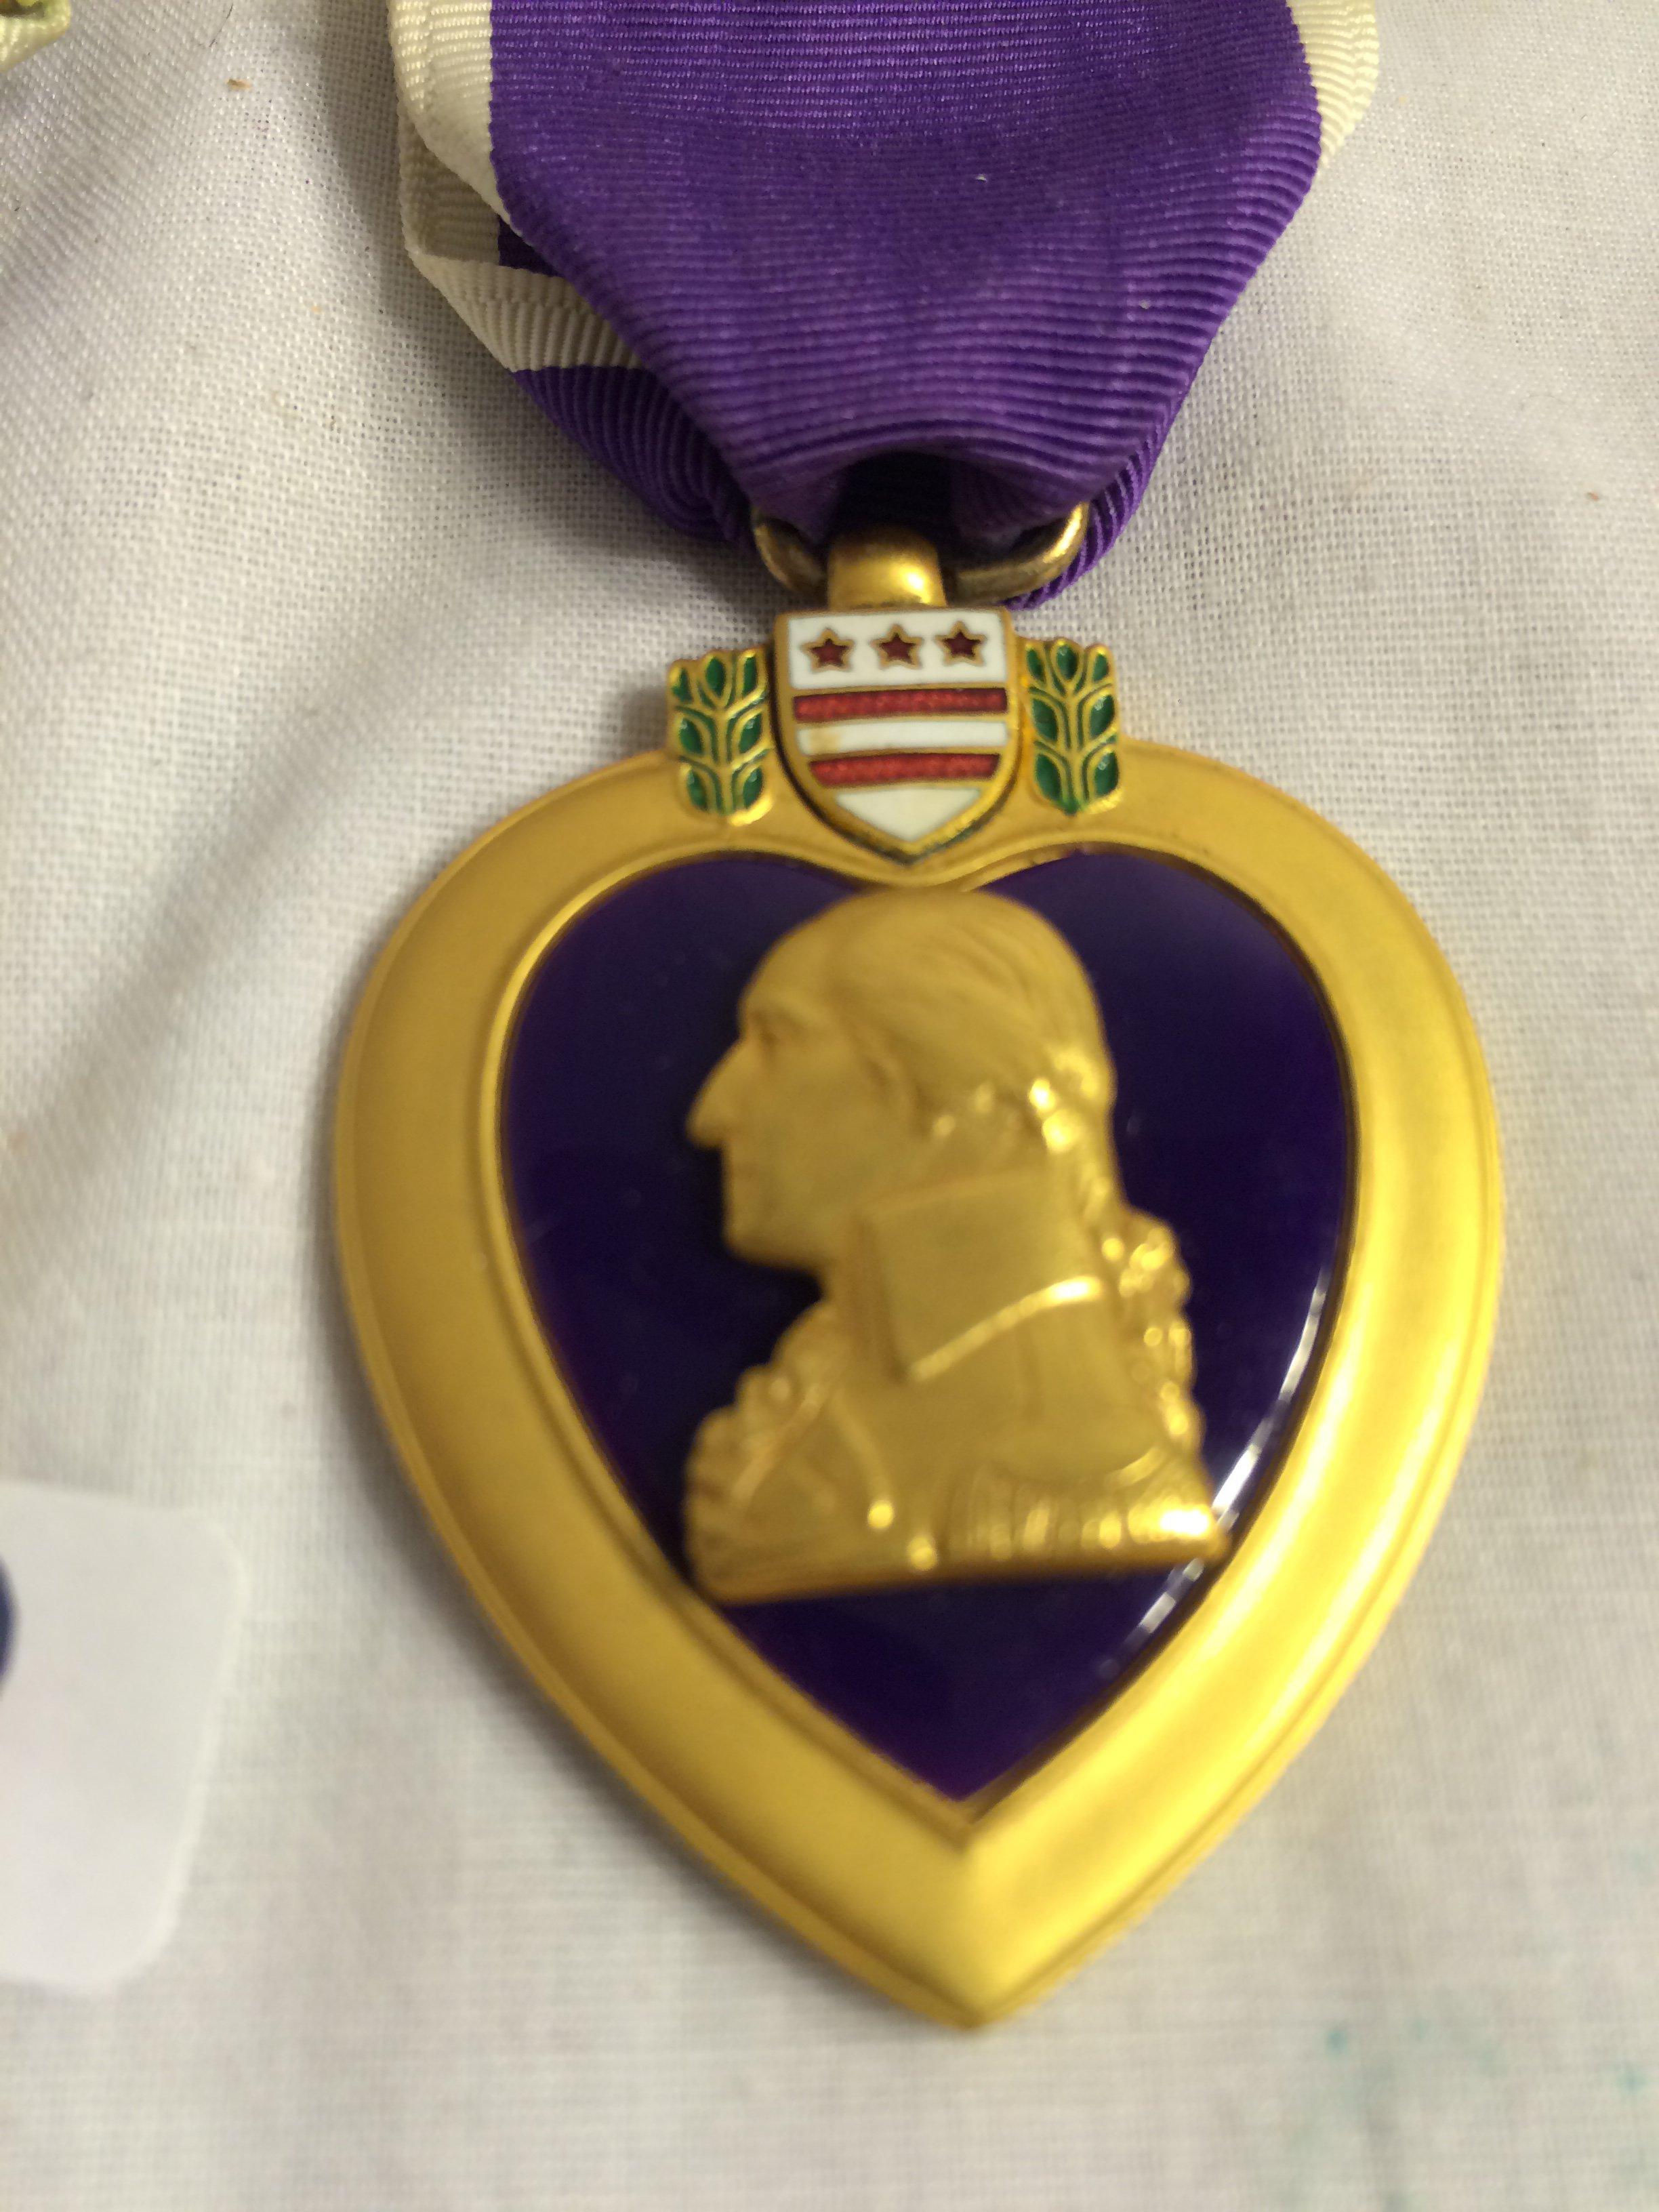 Lot of 2 Pieces Collector Purple Heart Medal For Military Merit -See Pictures